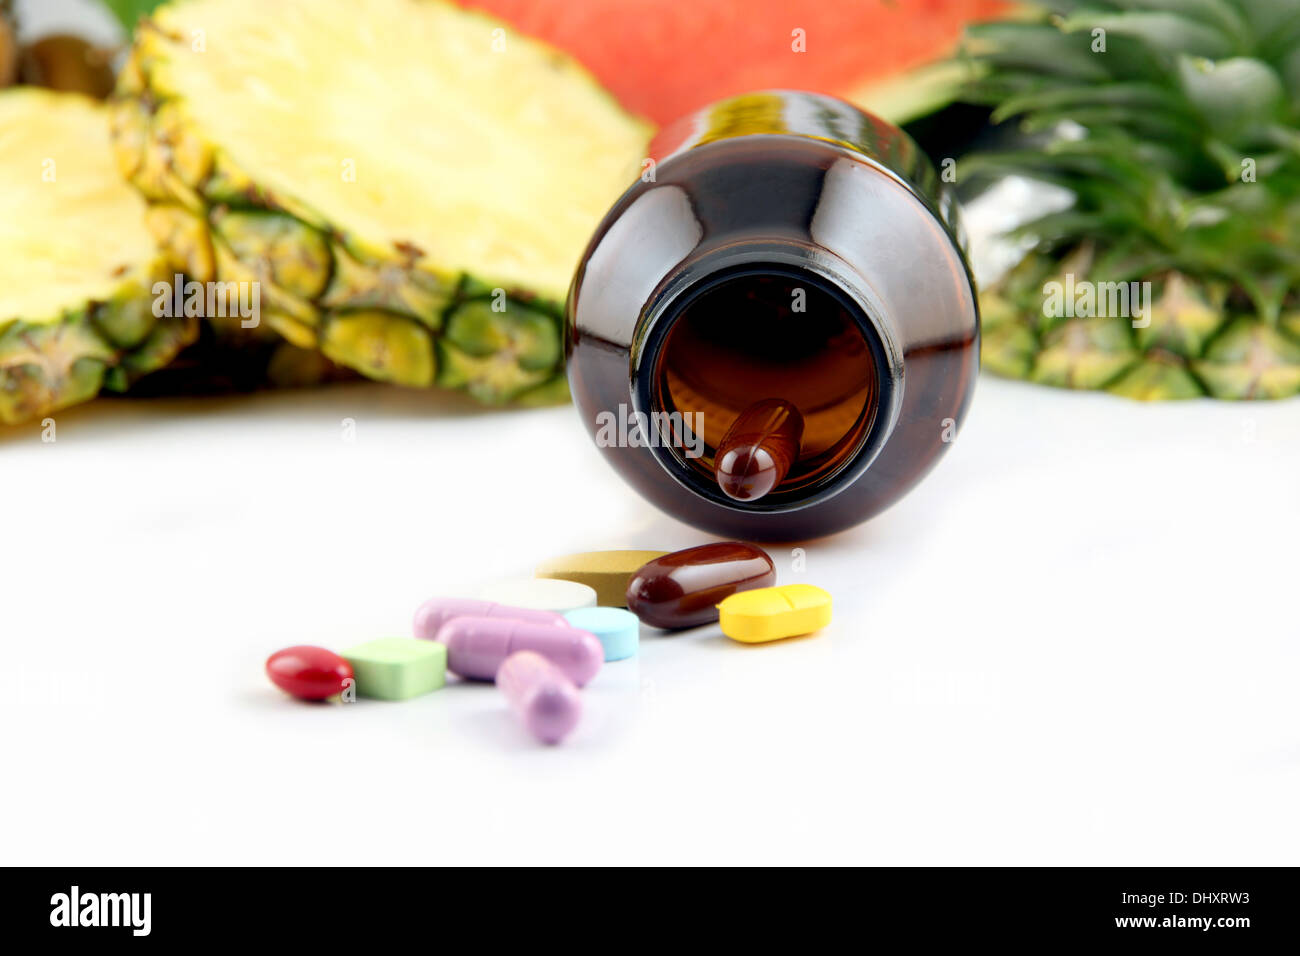 Fruits and medicines placed on white background. Stock Photo